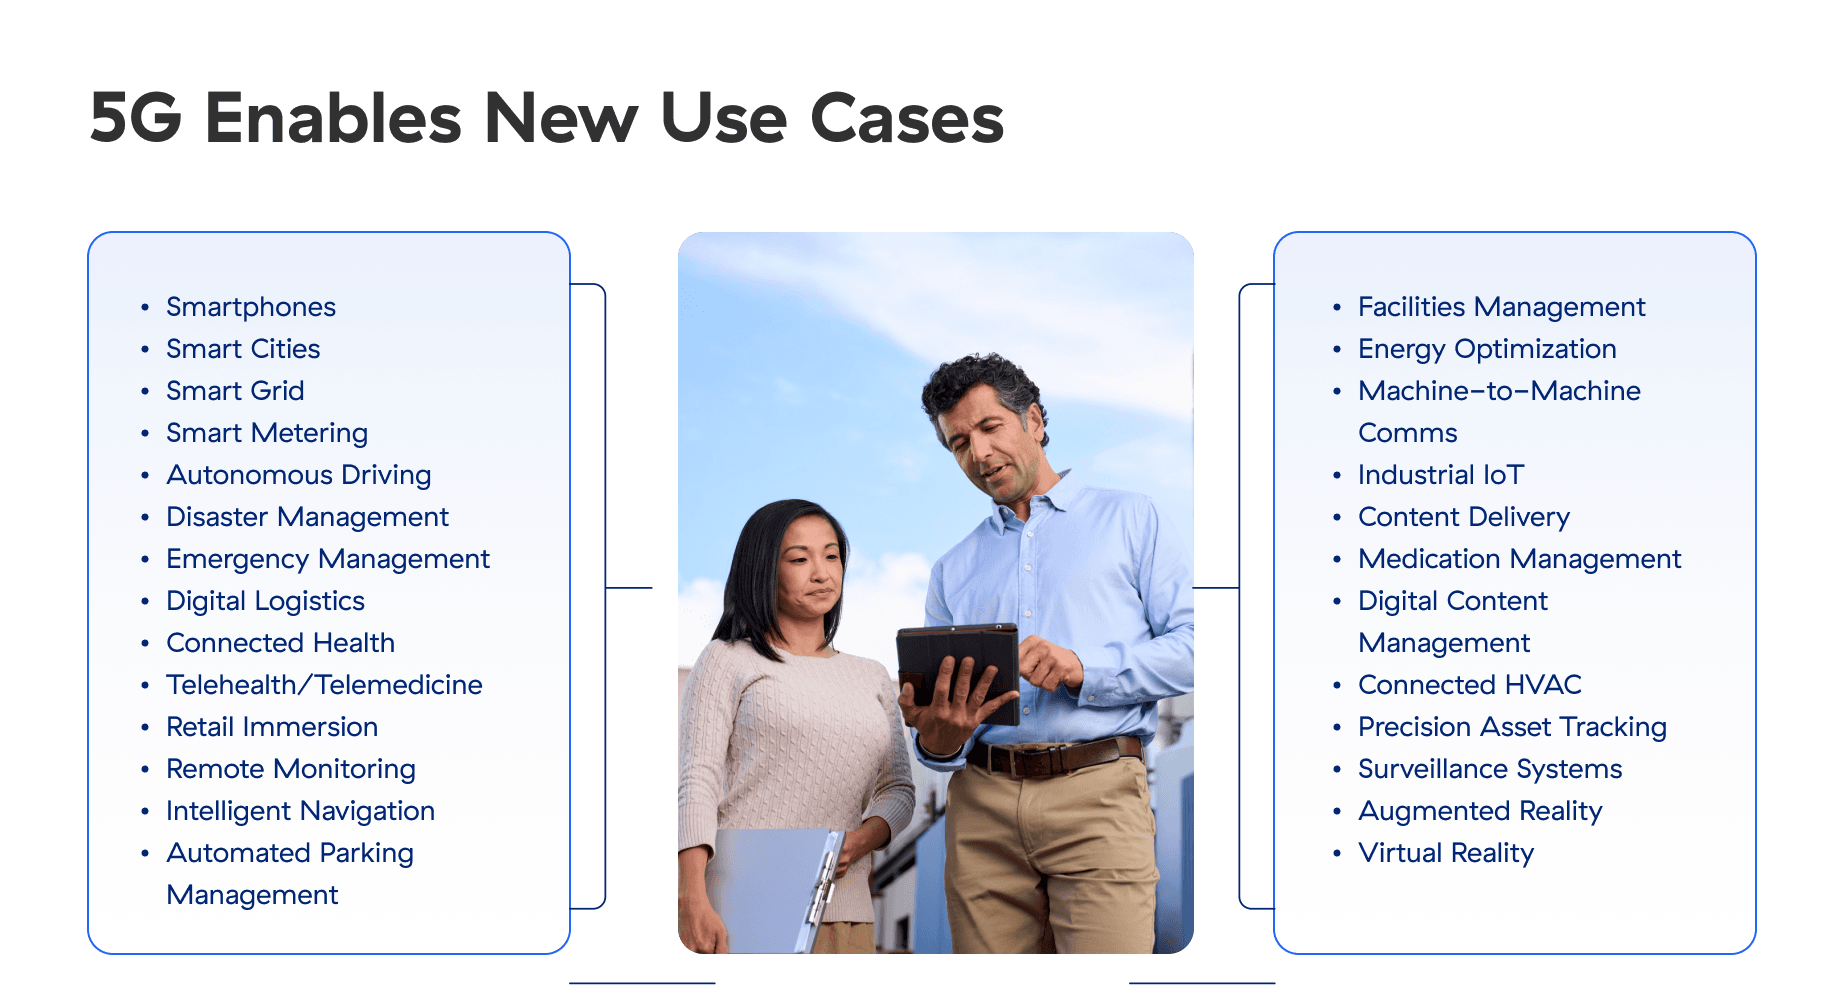 5G enables new use cases.